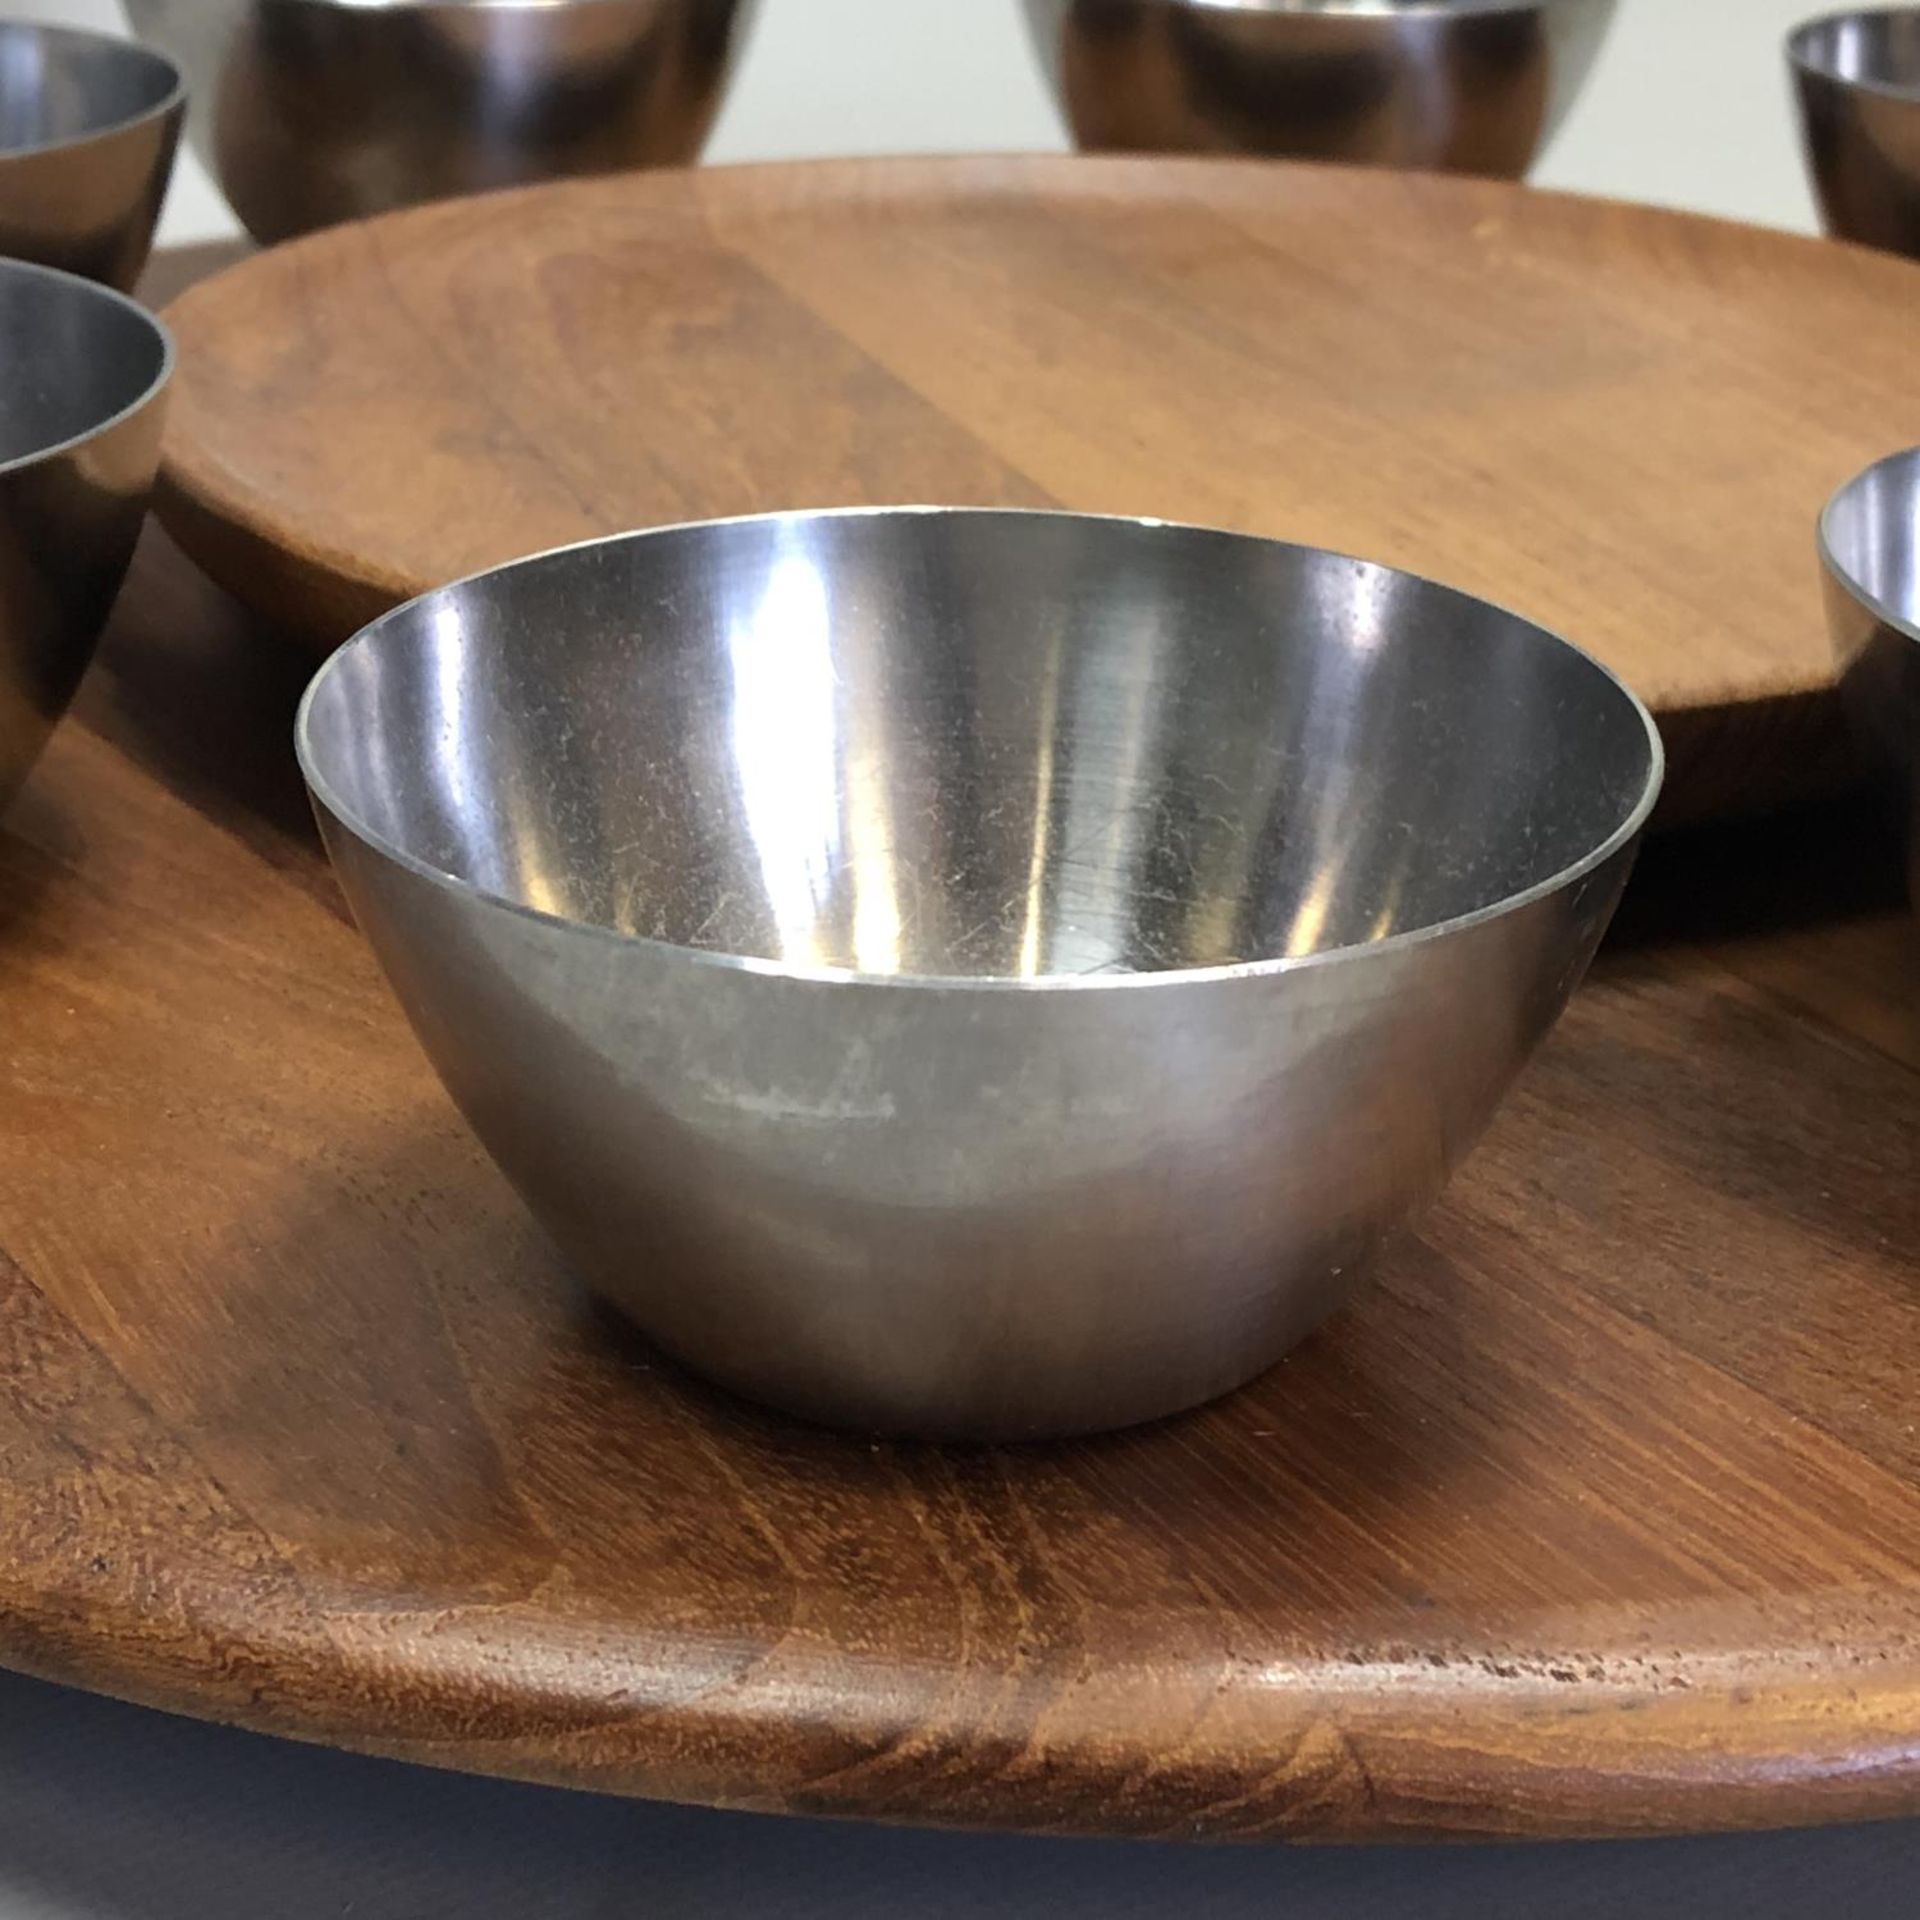 Large Wooden Lazy Susan with stainless steel bowls - Digsmed - Denmark - Image 2 of 4